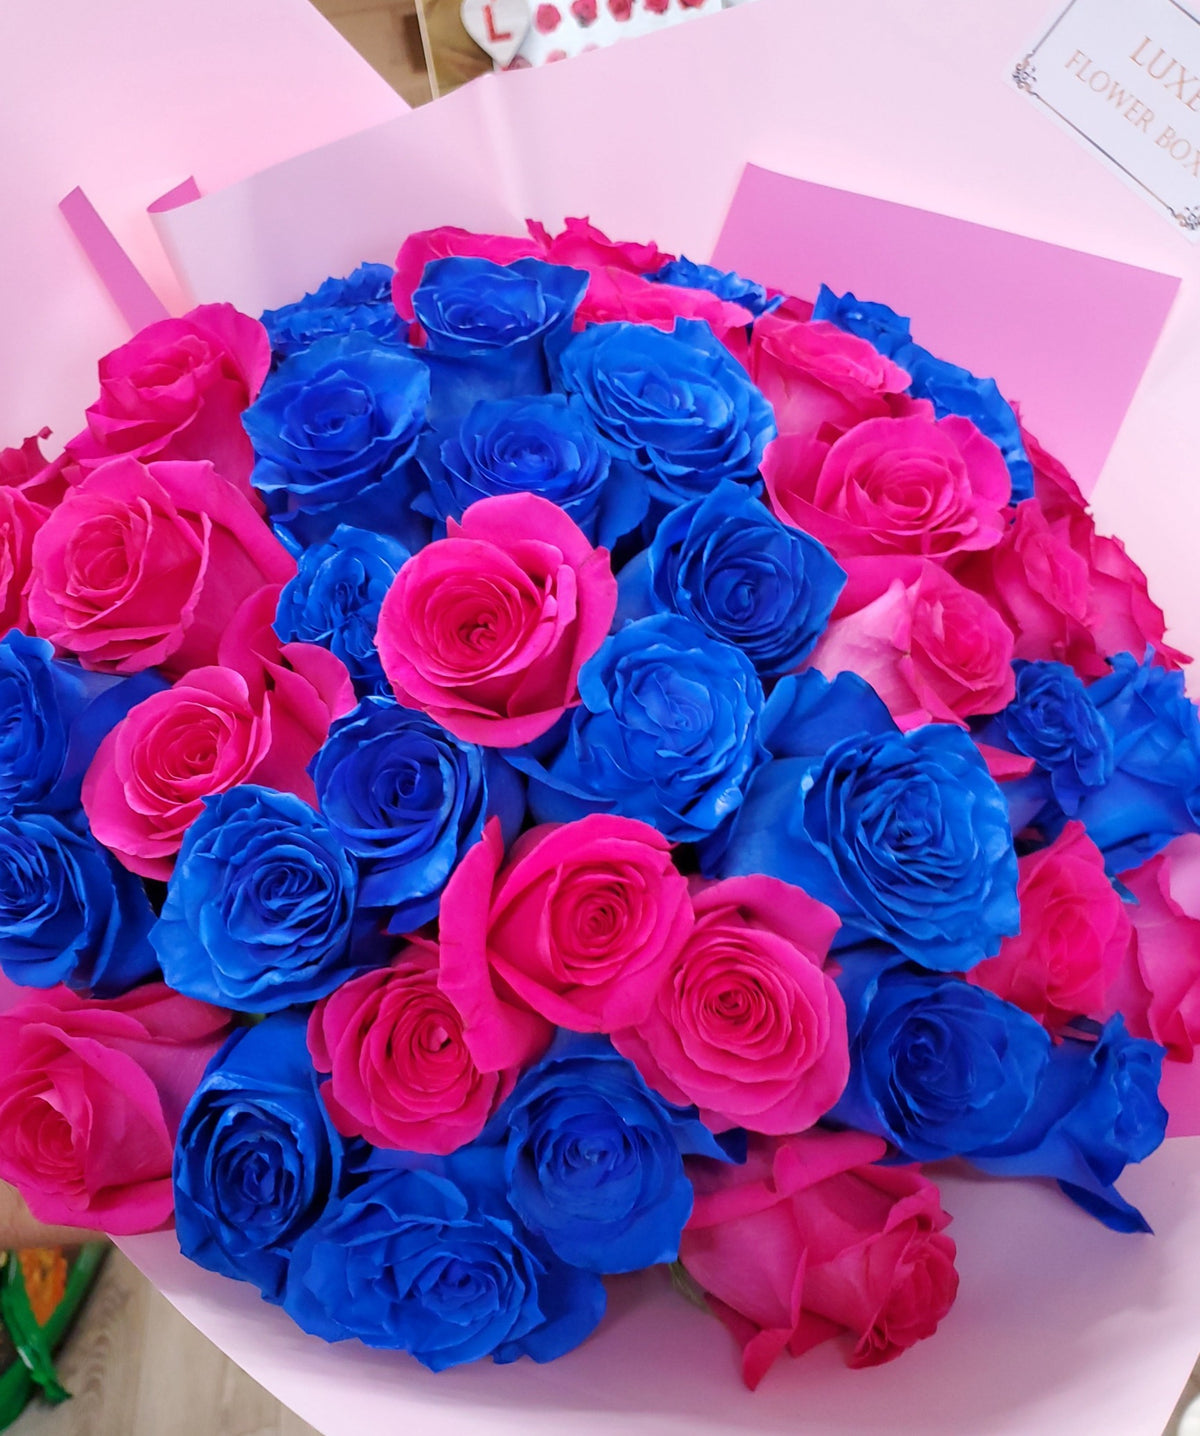 50 of Pink and Blue Roses